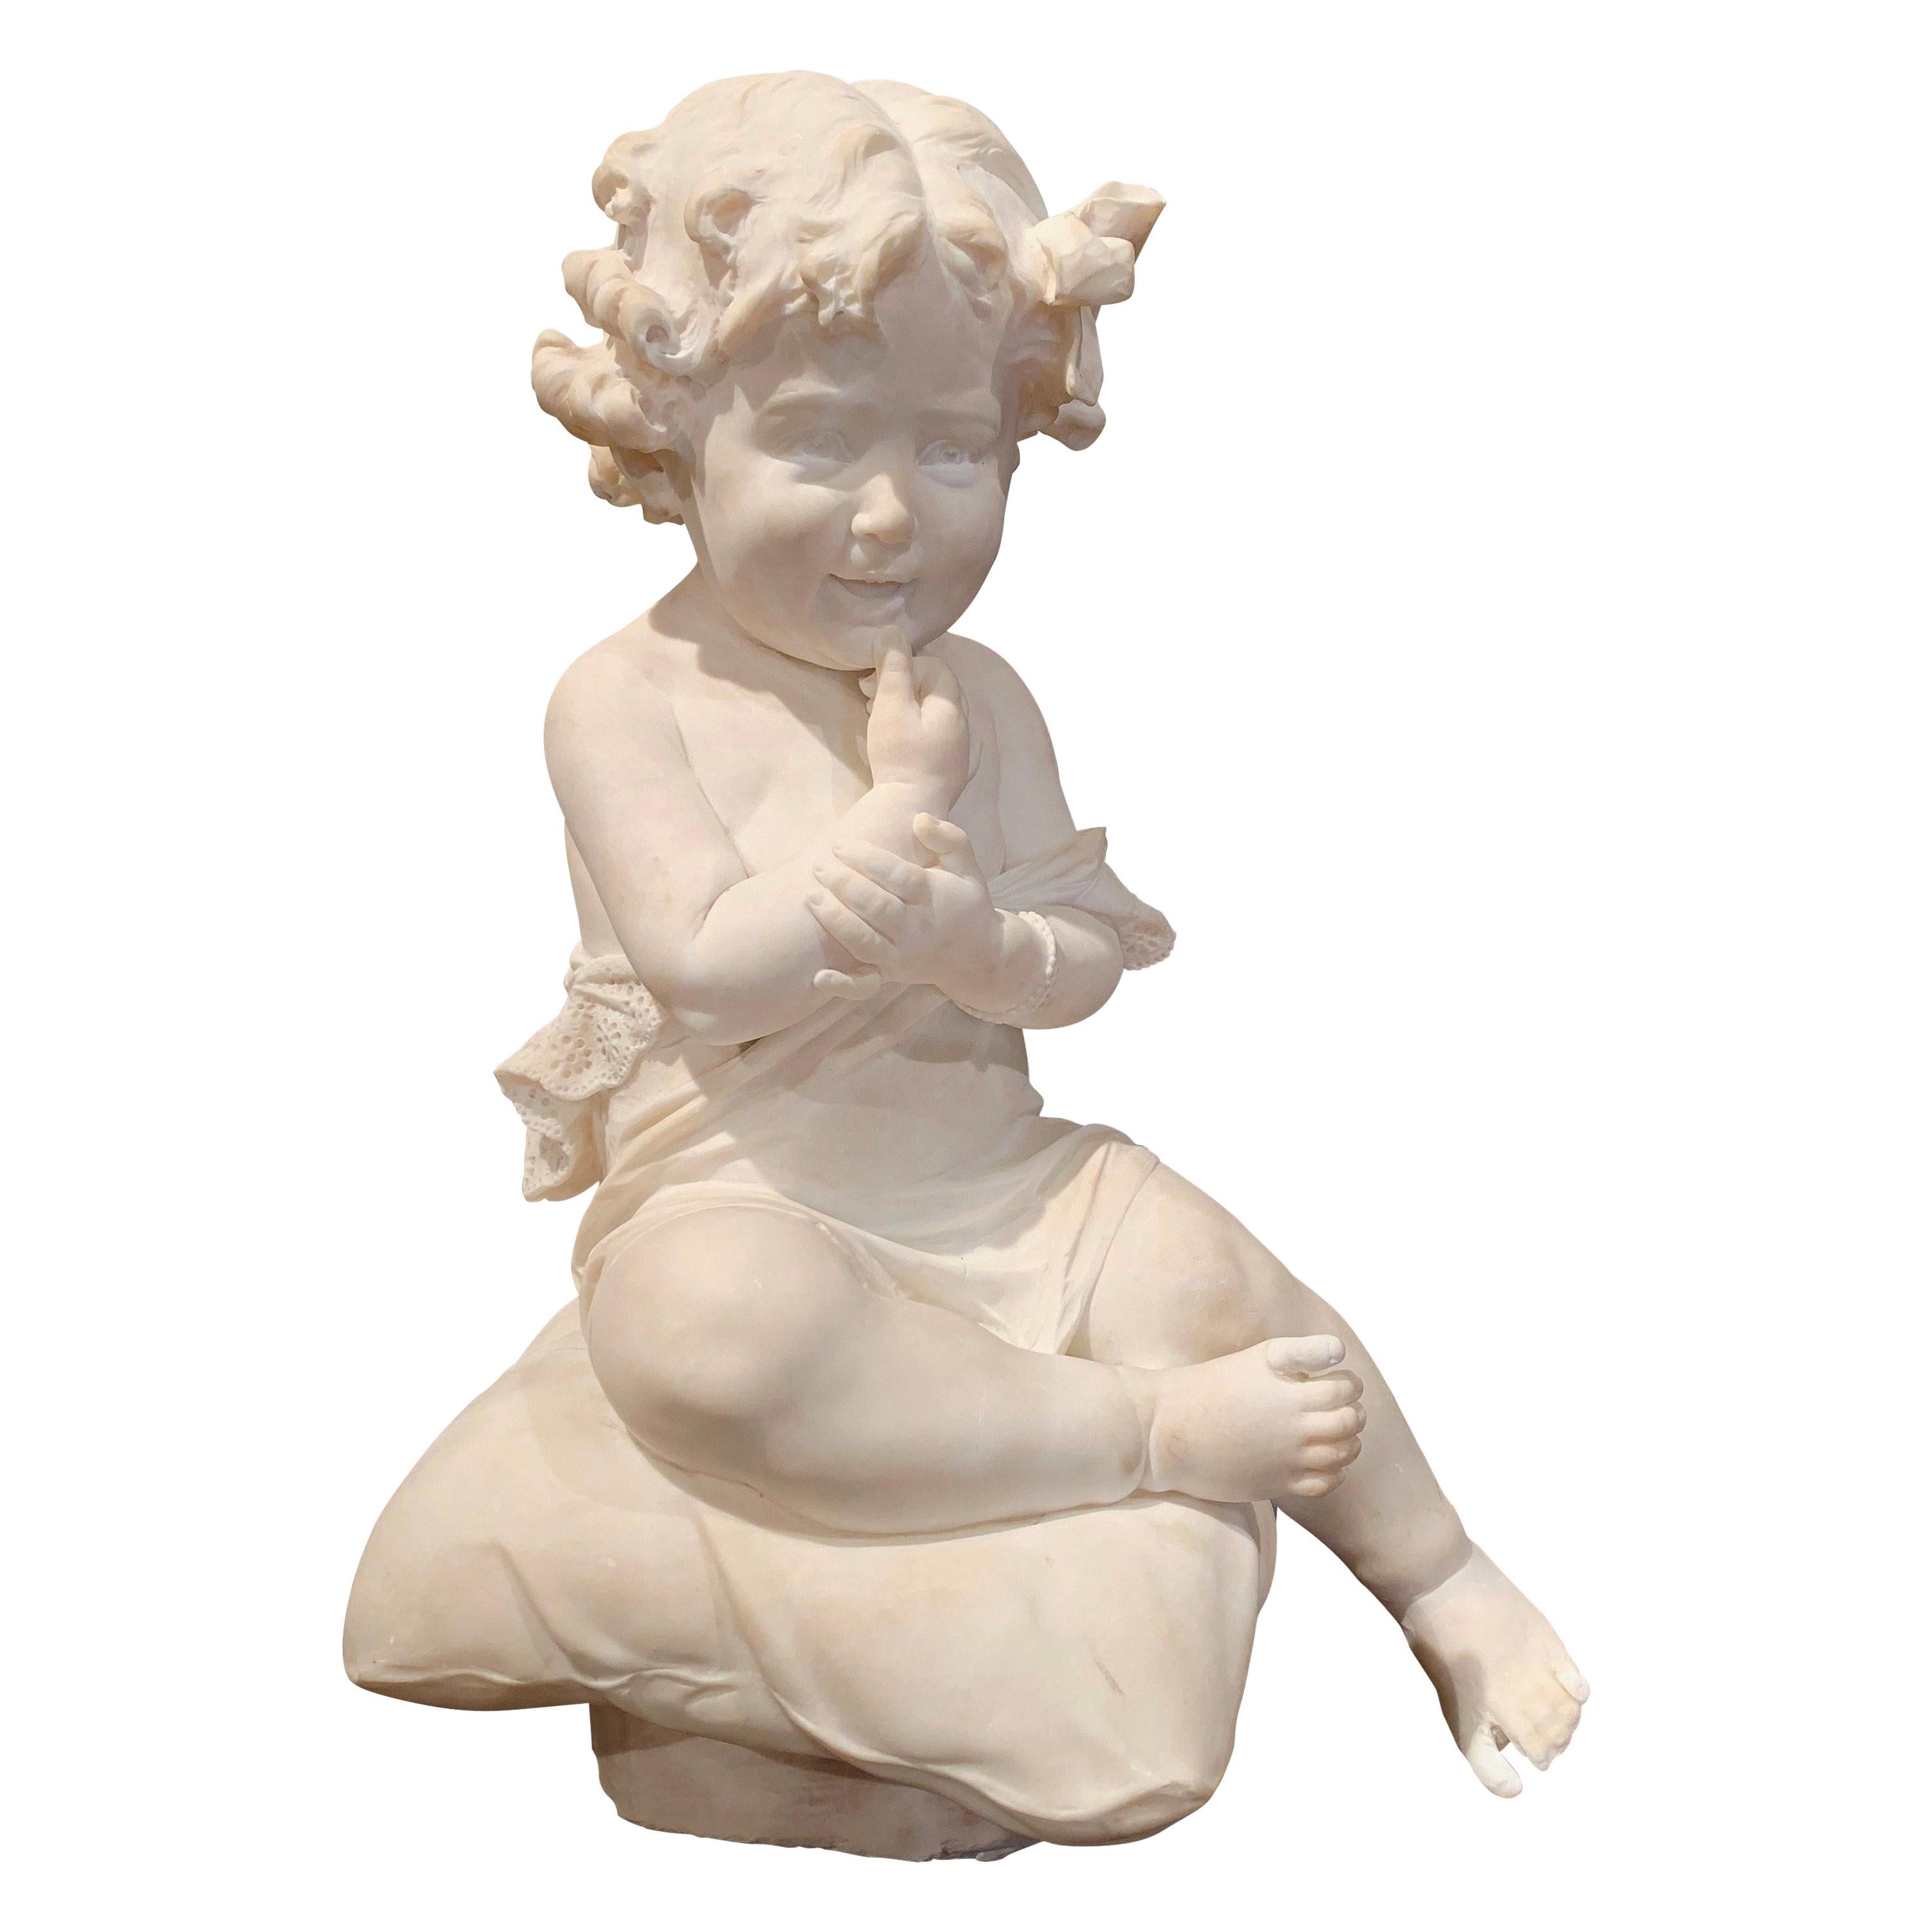 19th Century French Carved Young Child on Cushion Marble Sculpture Composition